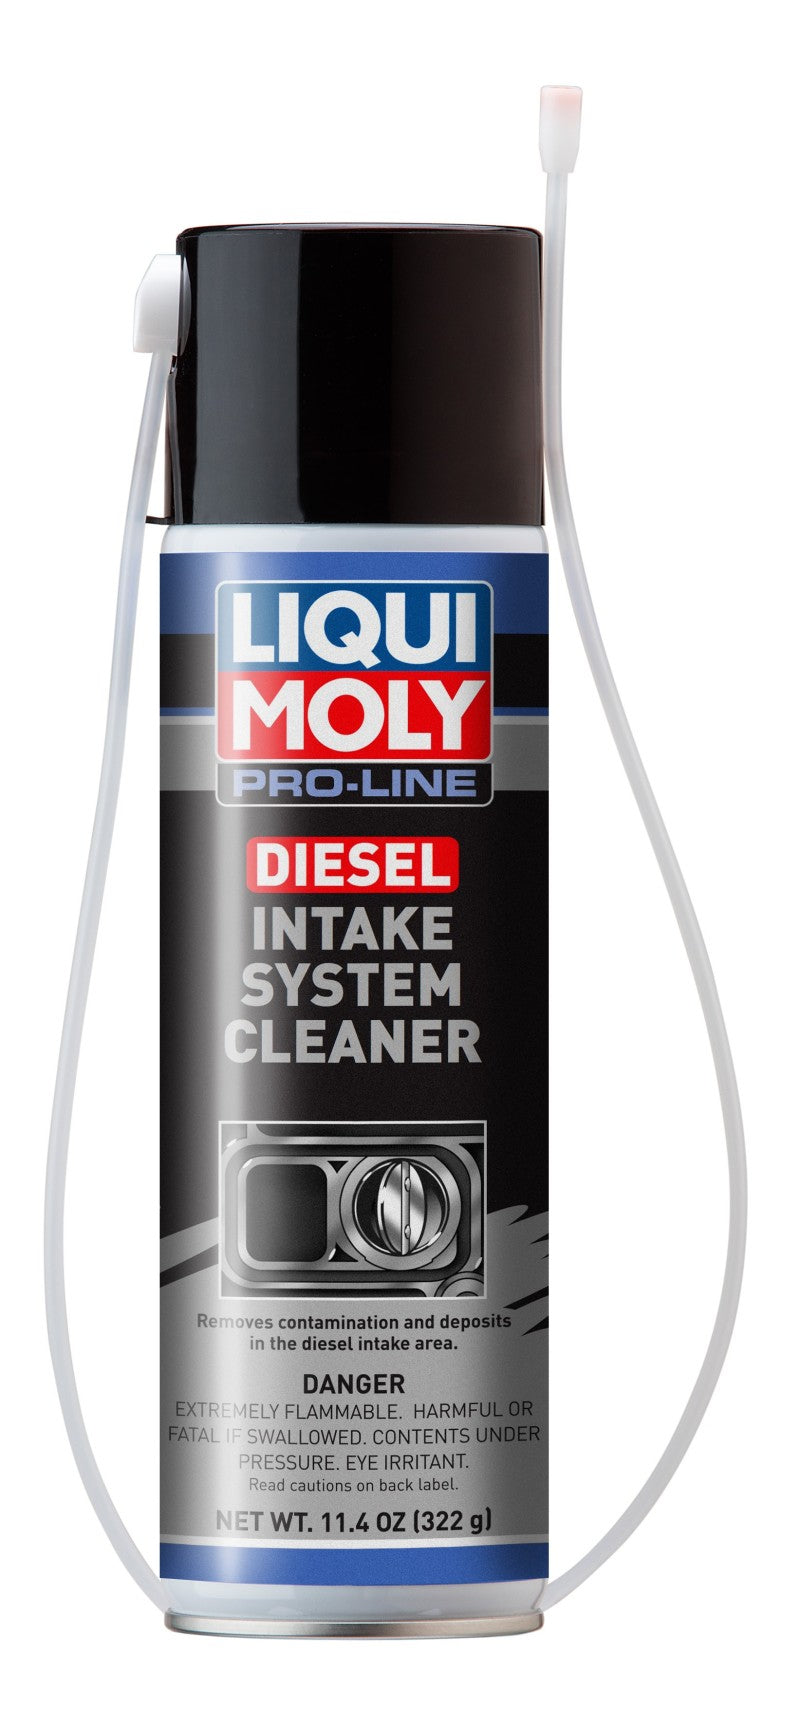 LIQUI MOLY 400mL Pro-Line Diesel Intake System Cleaner.